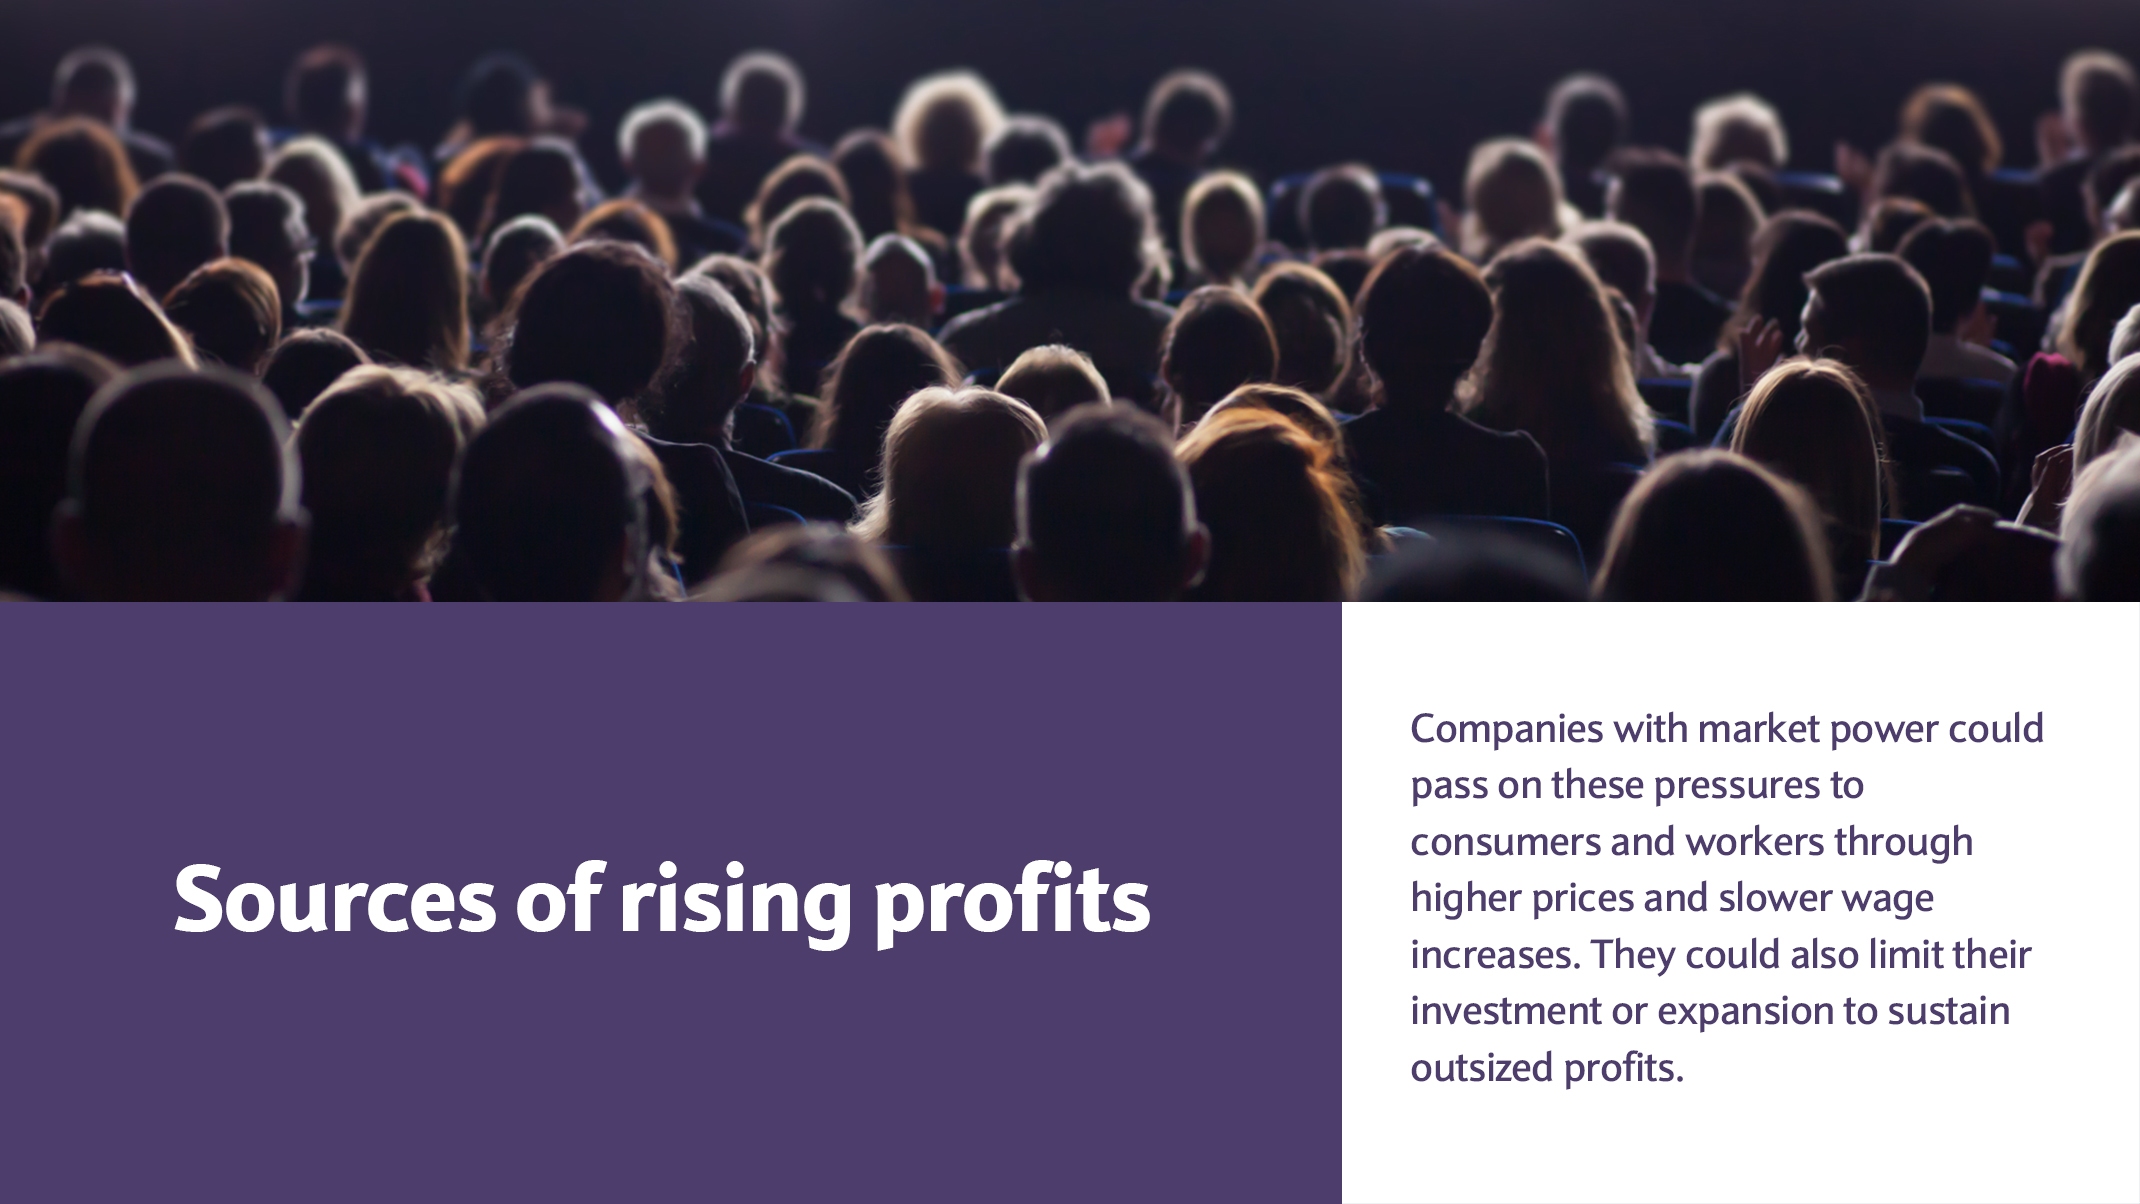 Companies with market power could pass on these pressures to consumers and workers through higher prices and slower wage increases. They could also limit their investment or expansion to sustain outsized profits.